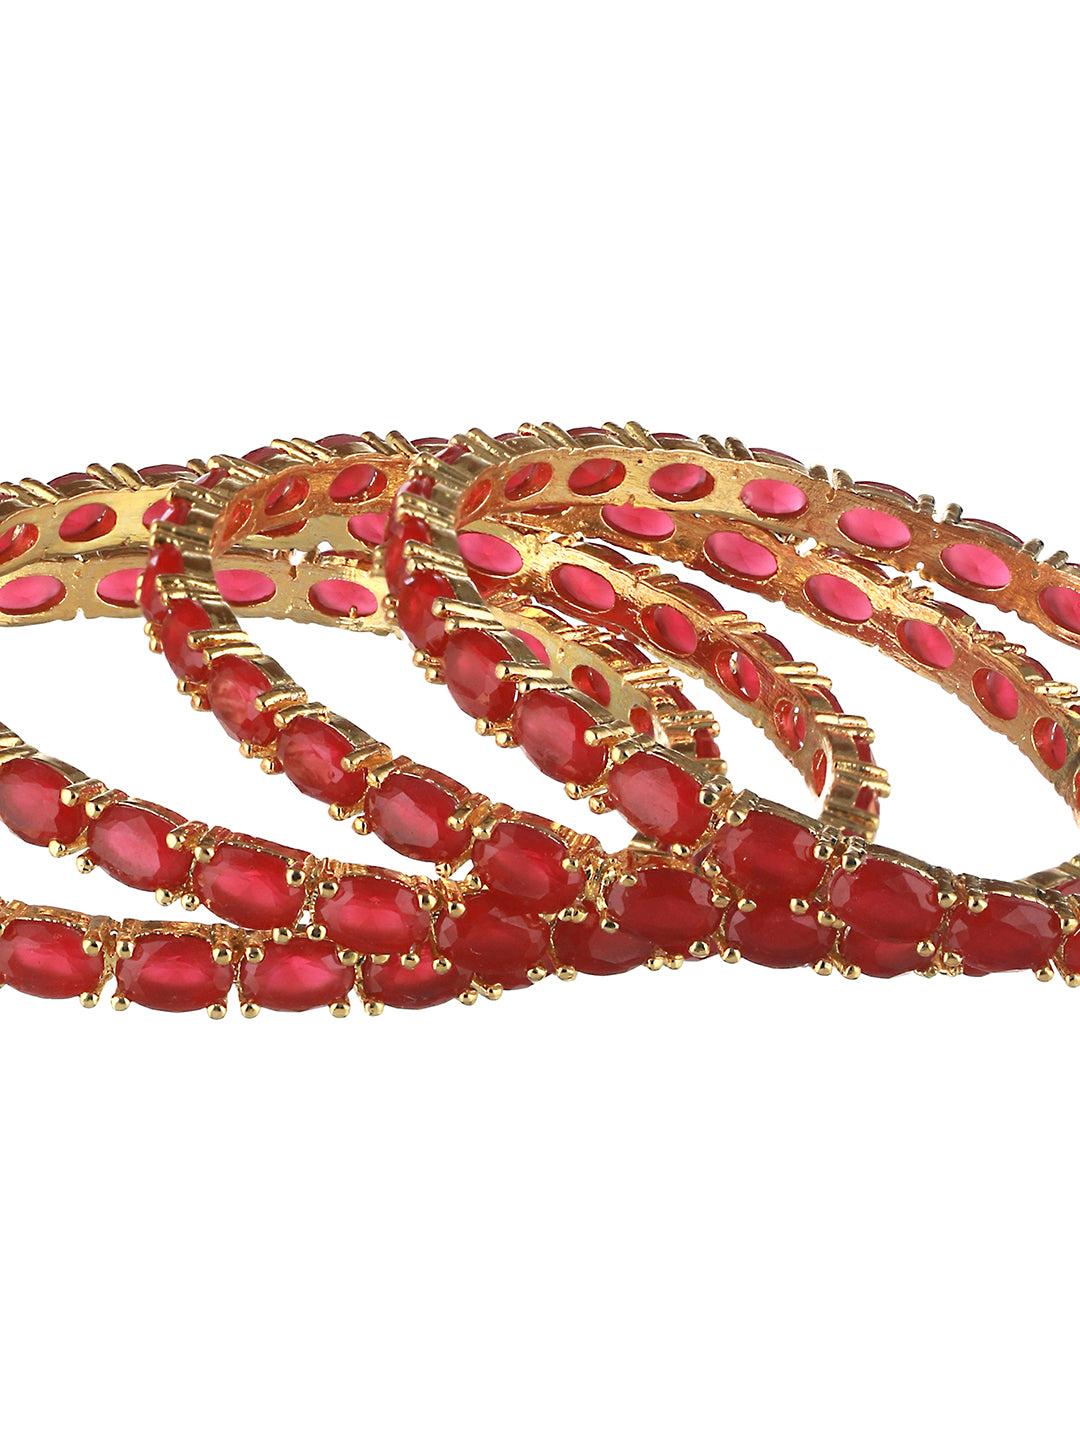 Set of 4 Gold Plated  Red Ruby Stone Studded  Bangles, zaveri pearls, sale price rs, sale price, sale gold plated, sale gold, sale, rubans, ring, regular price, priyassi jewellery, kushal's -